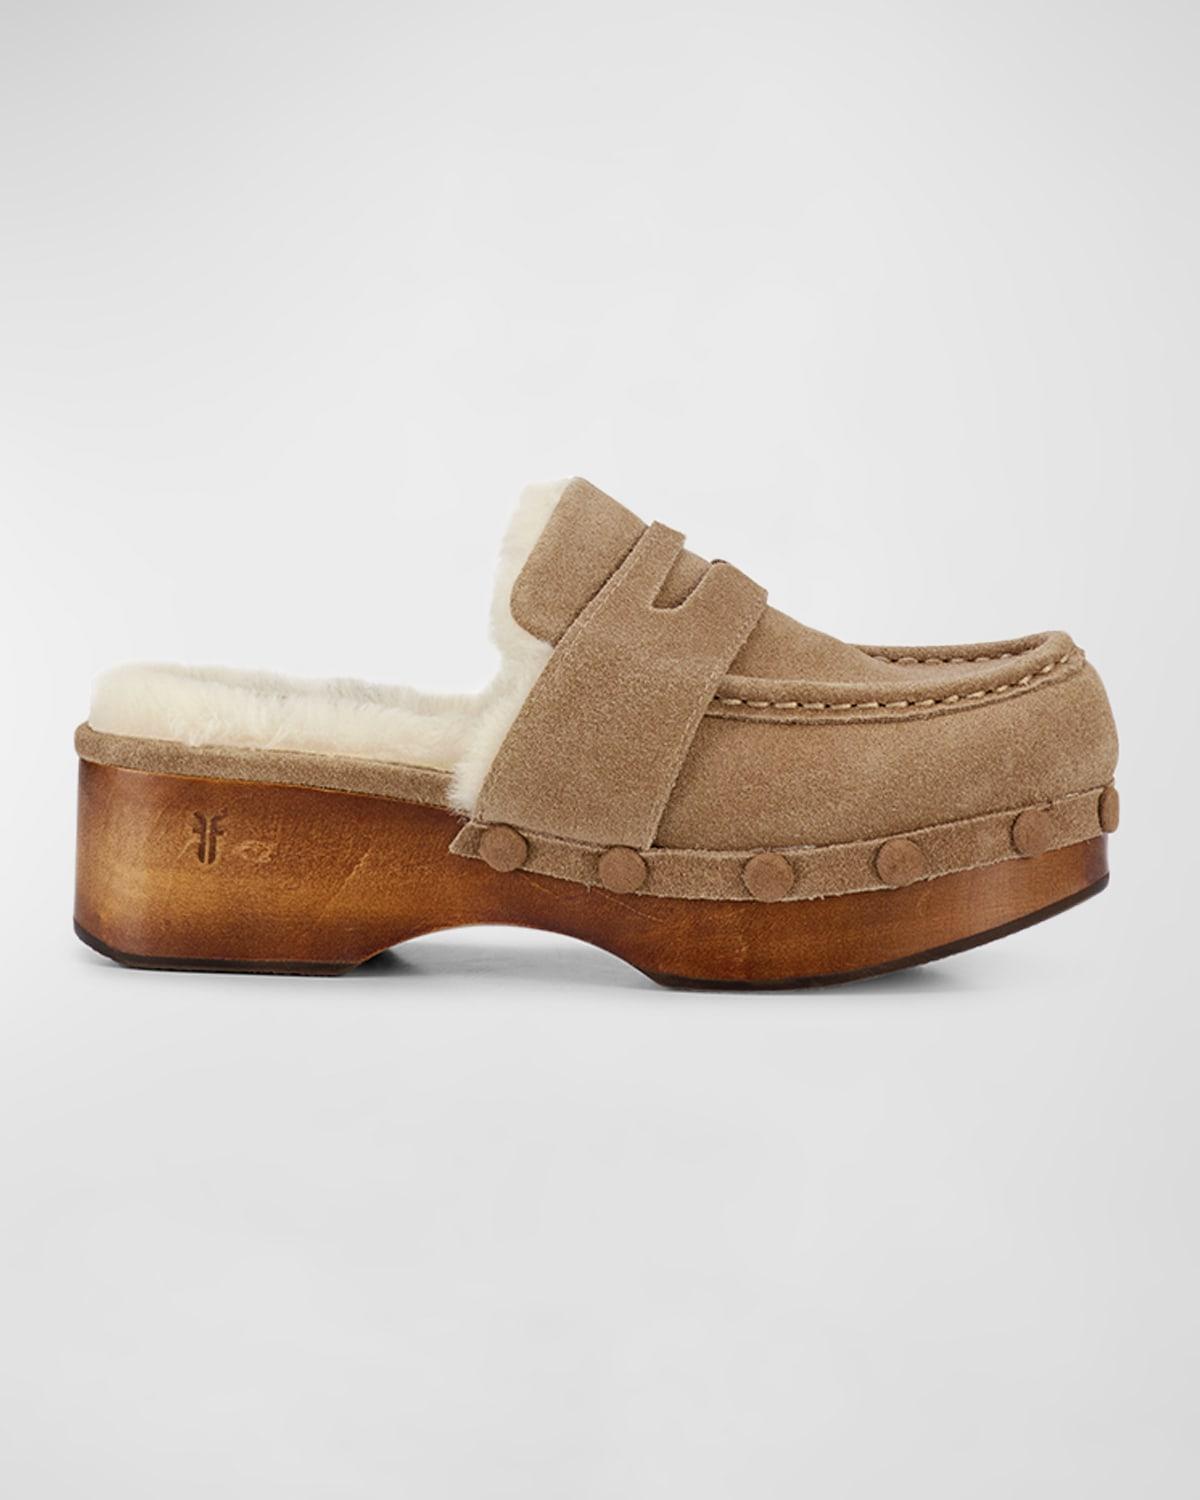 Frye Melody Suede Shearling Penny Loafer Clogs in Brown | Lyst